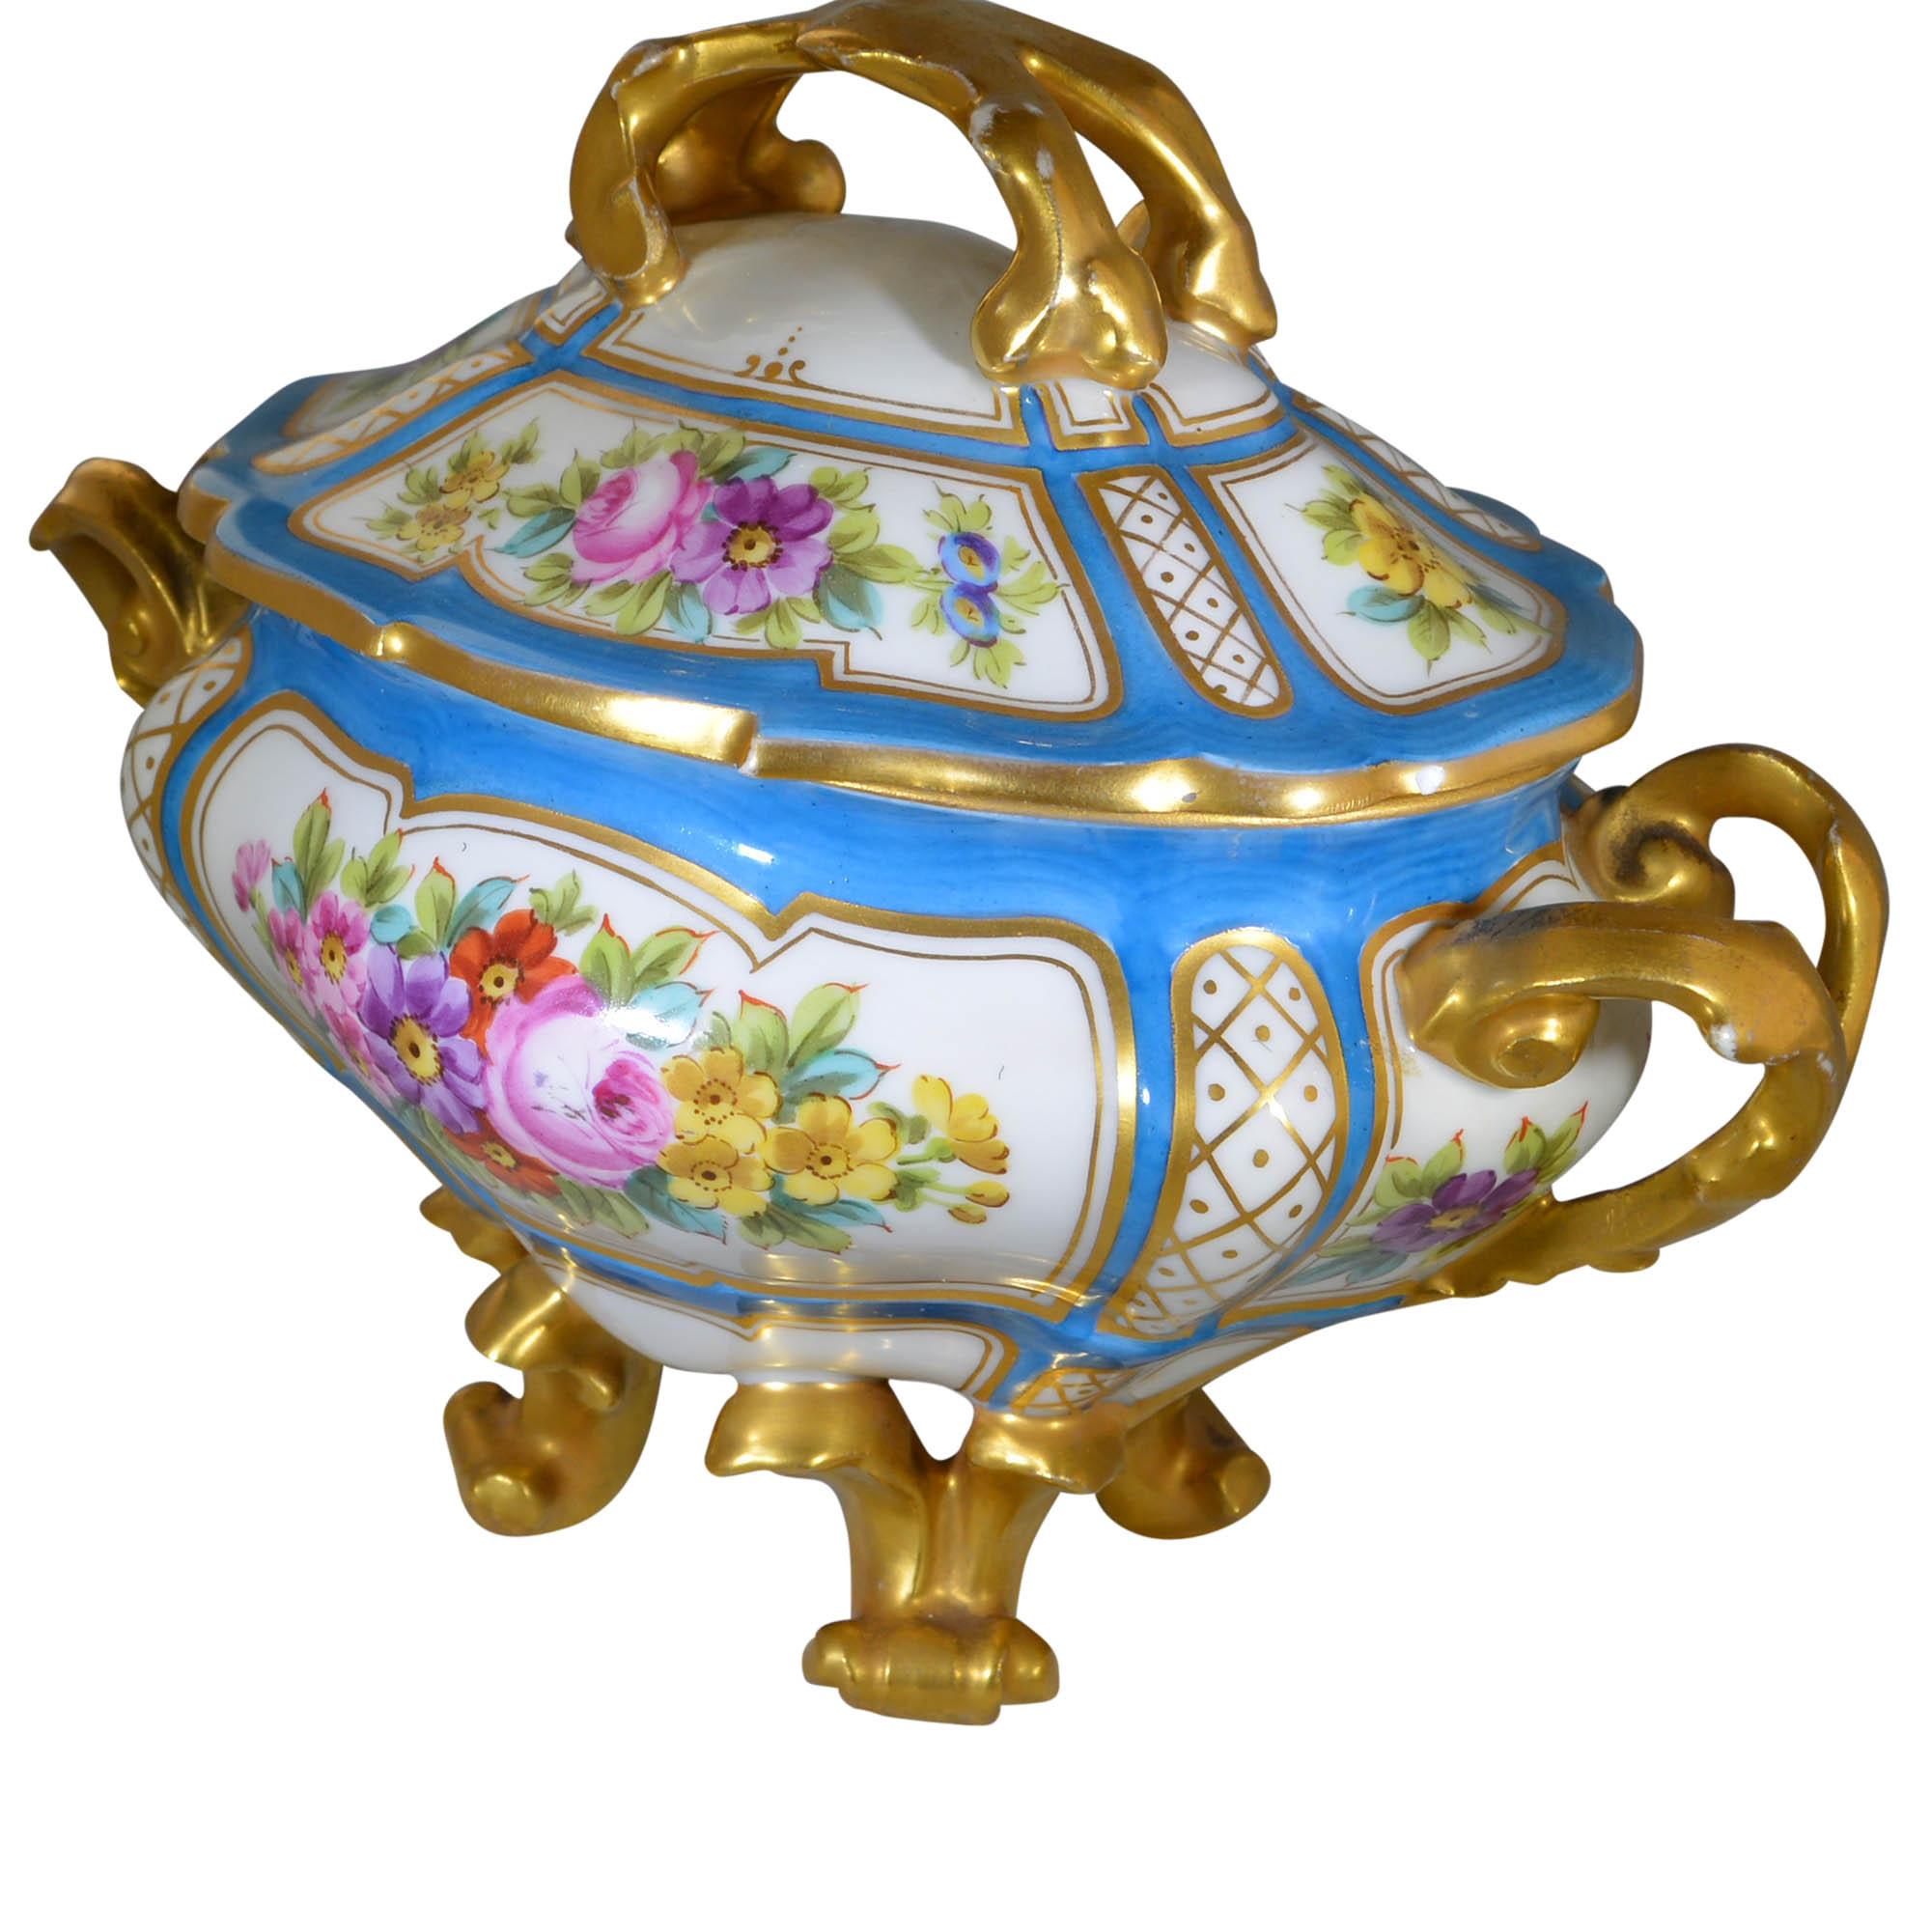 This is a fine quality 19th century French antique Sèvres porcelain gravy tureen with fantastic hand painted panels, with gilt decoration. Uniquely designed with four feet. Lovely blue base color on white porcelain. The floral panels are primarily